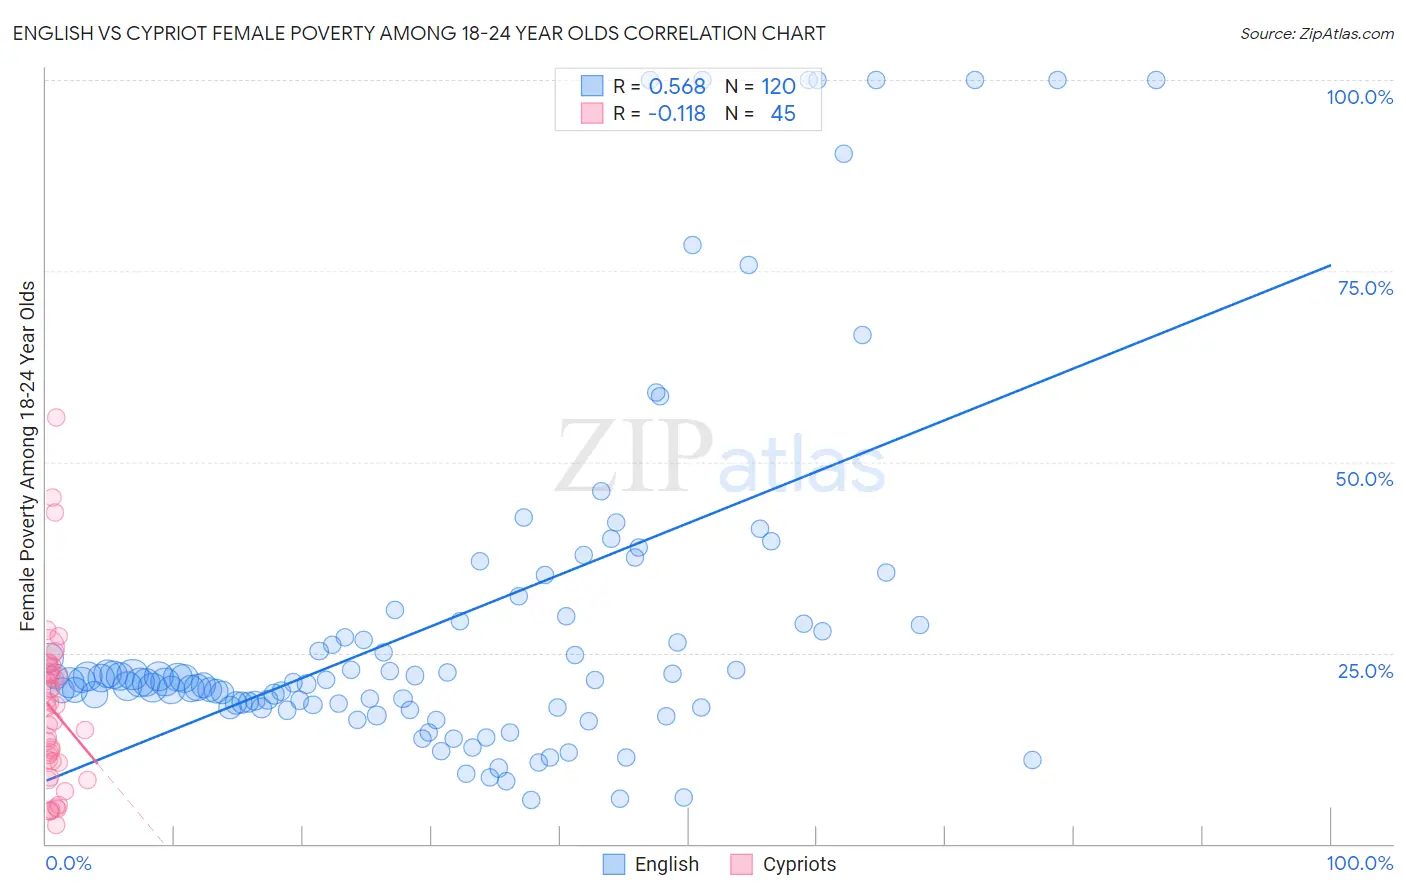 English vs Cypriot Female Poverty Among 18-24 Year Olds